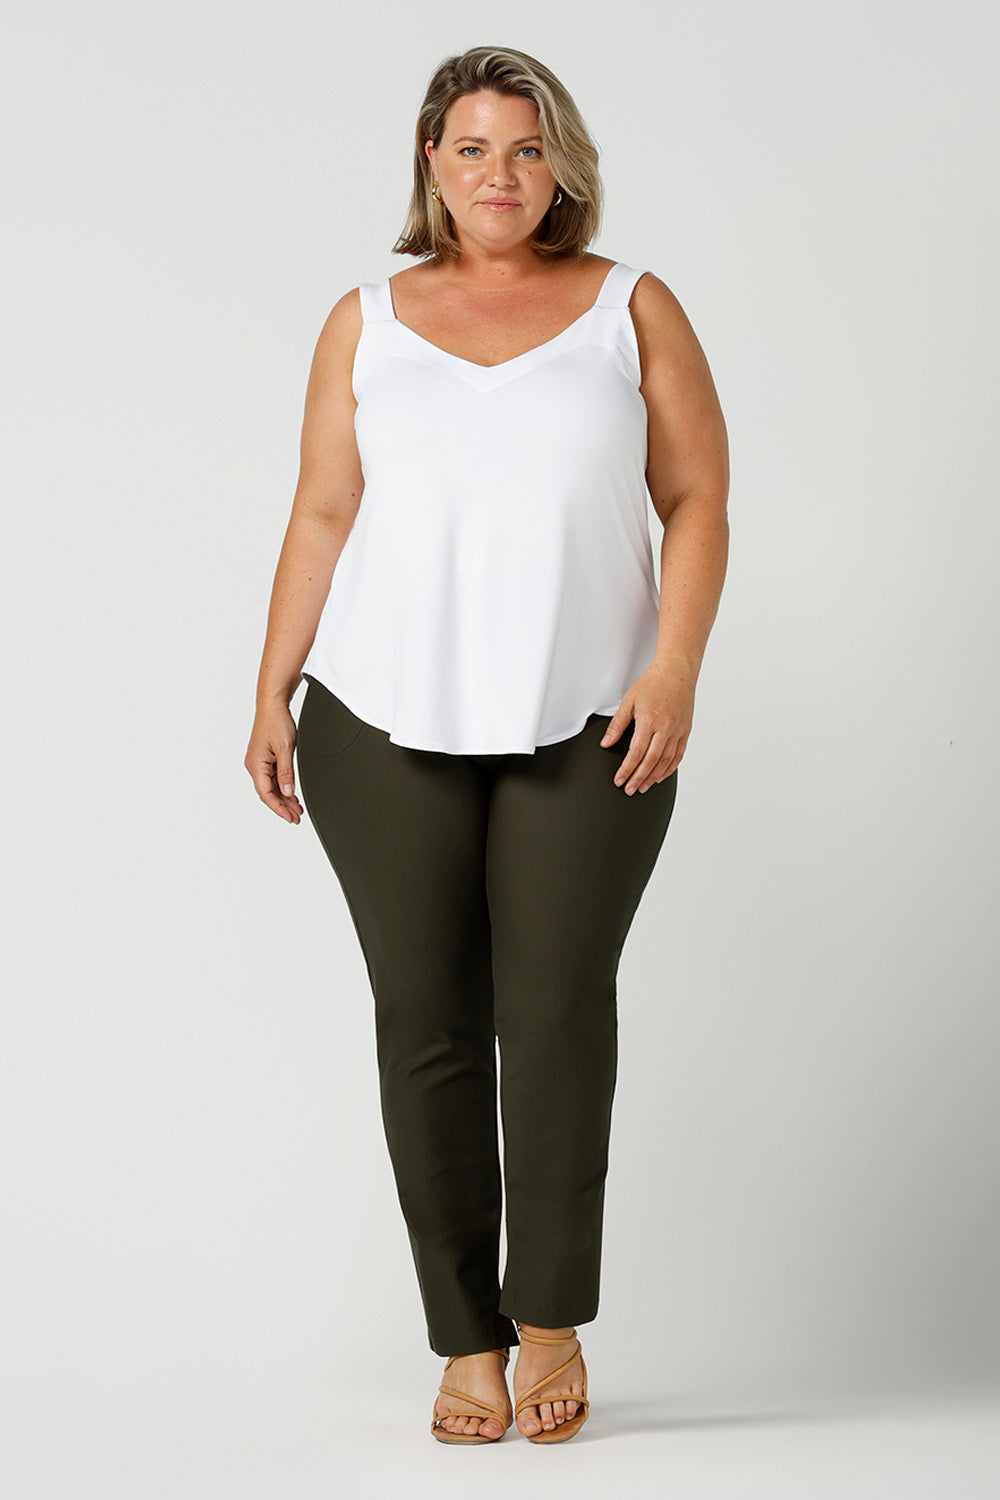 In olive green, these slim leg women's pants are great professional work and office wear trousers. Made in Australia by affordable, ethical clothing brand, Leina & Fleur this stretch pants are worn as casual pants with a white cami top in bamboo jersey and shown on a size 18, plus size woman. Shop ladies clothing online in petite to plus sizes at Leina & Fleur's online boutique.